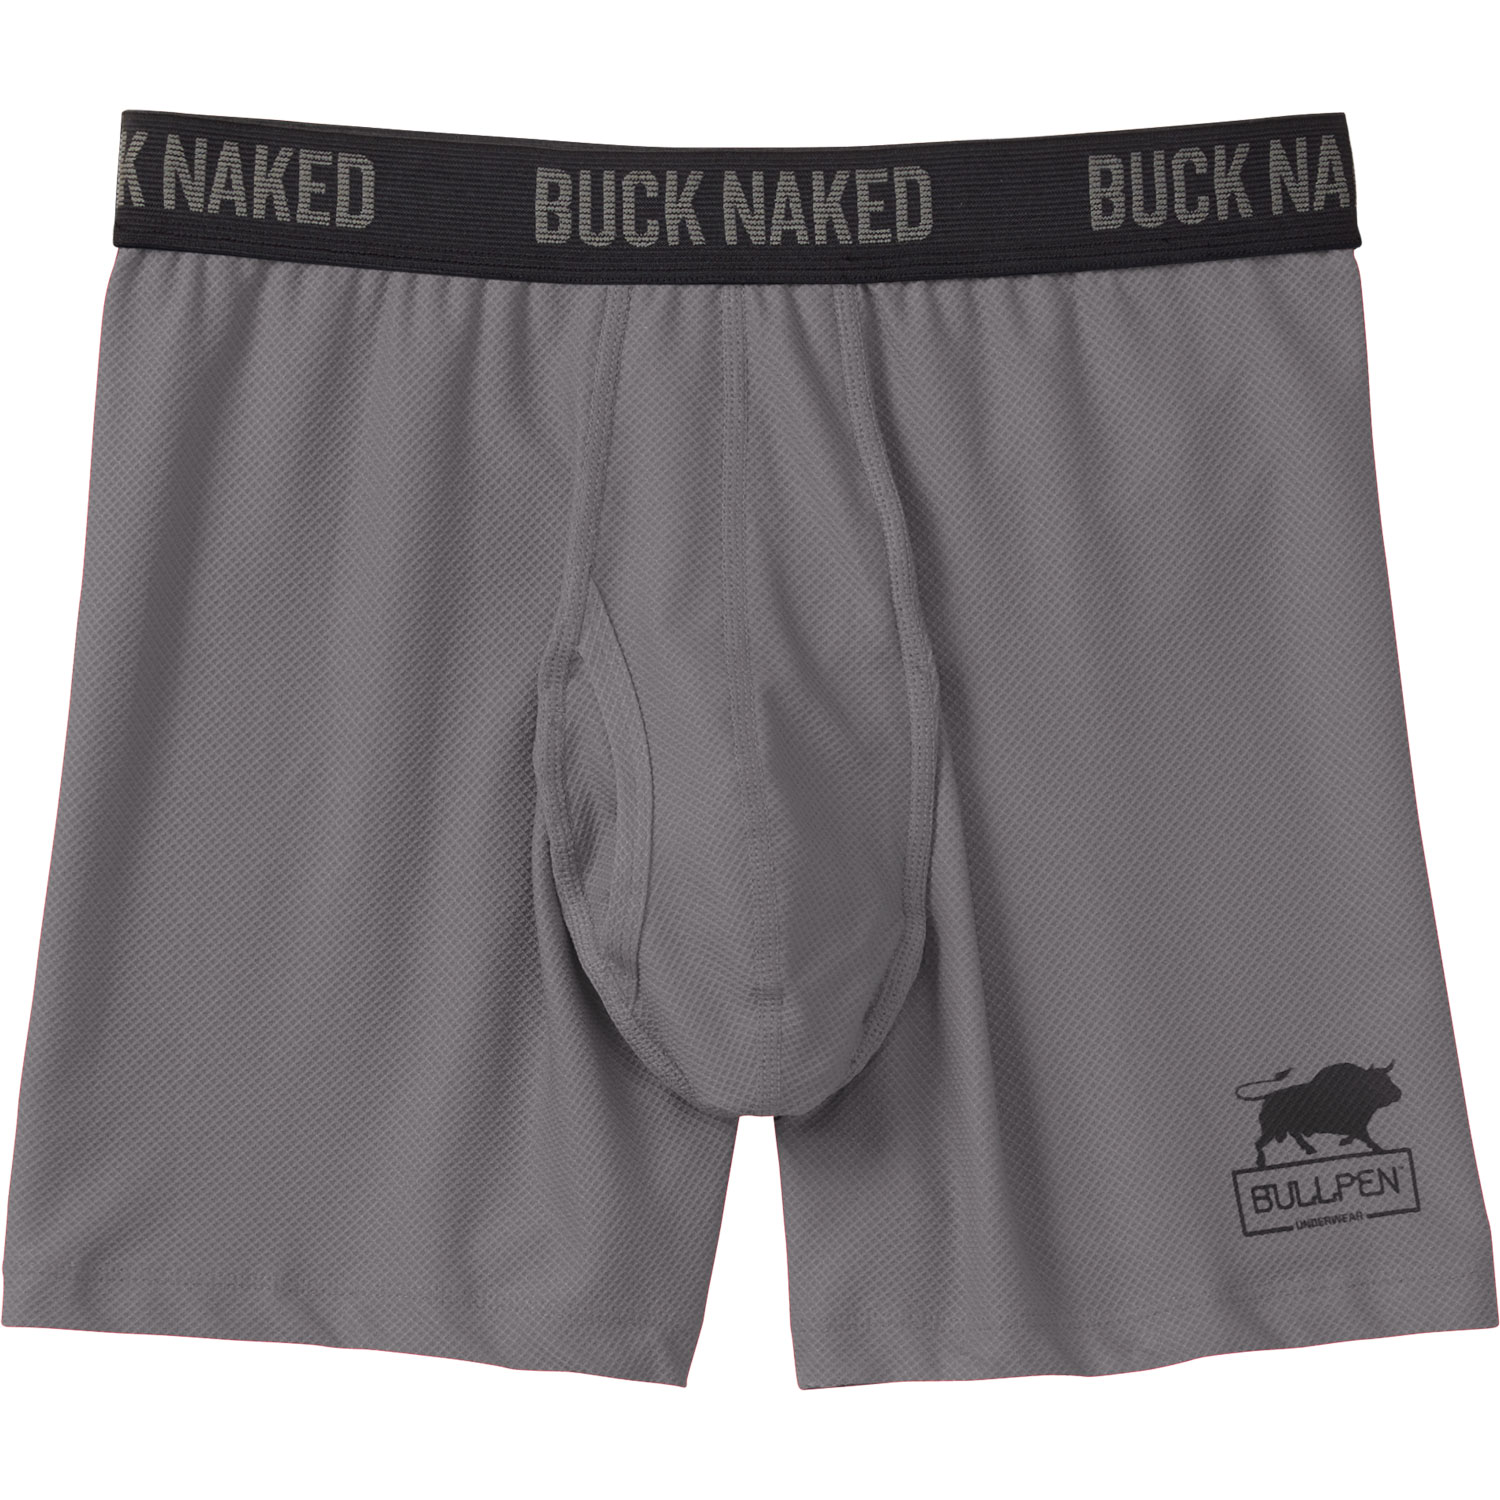 1 Pr Duluth Trading Buck Naked Boxer Briefs Spread the Peanut Butter Love  76715